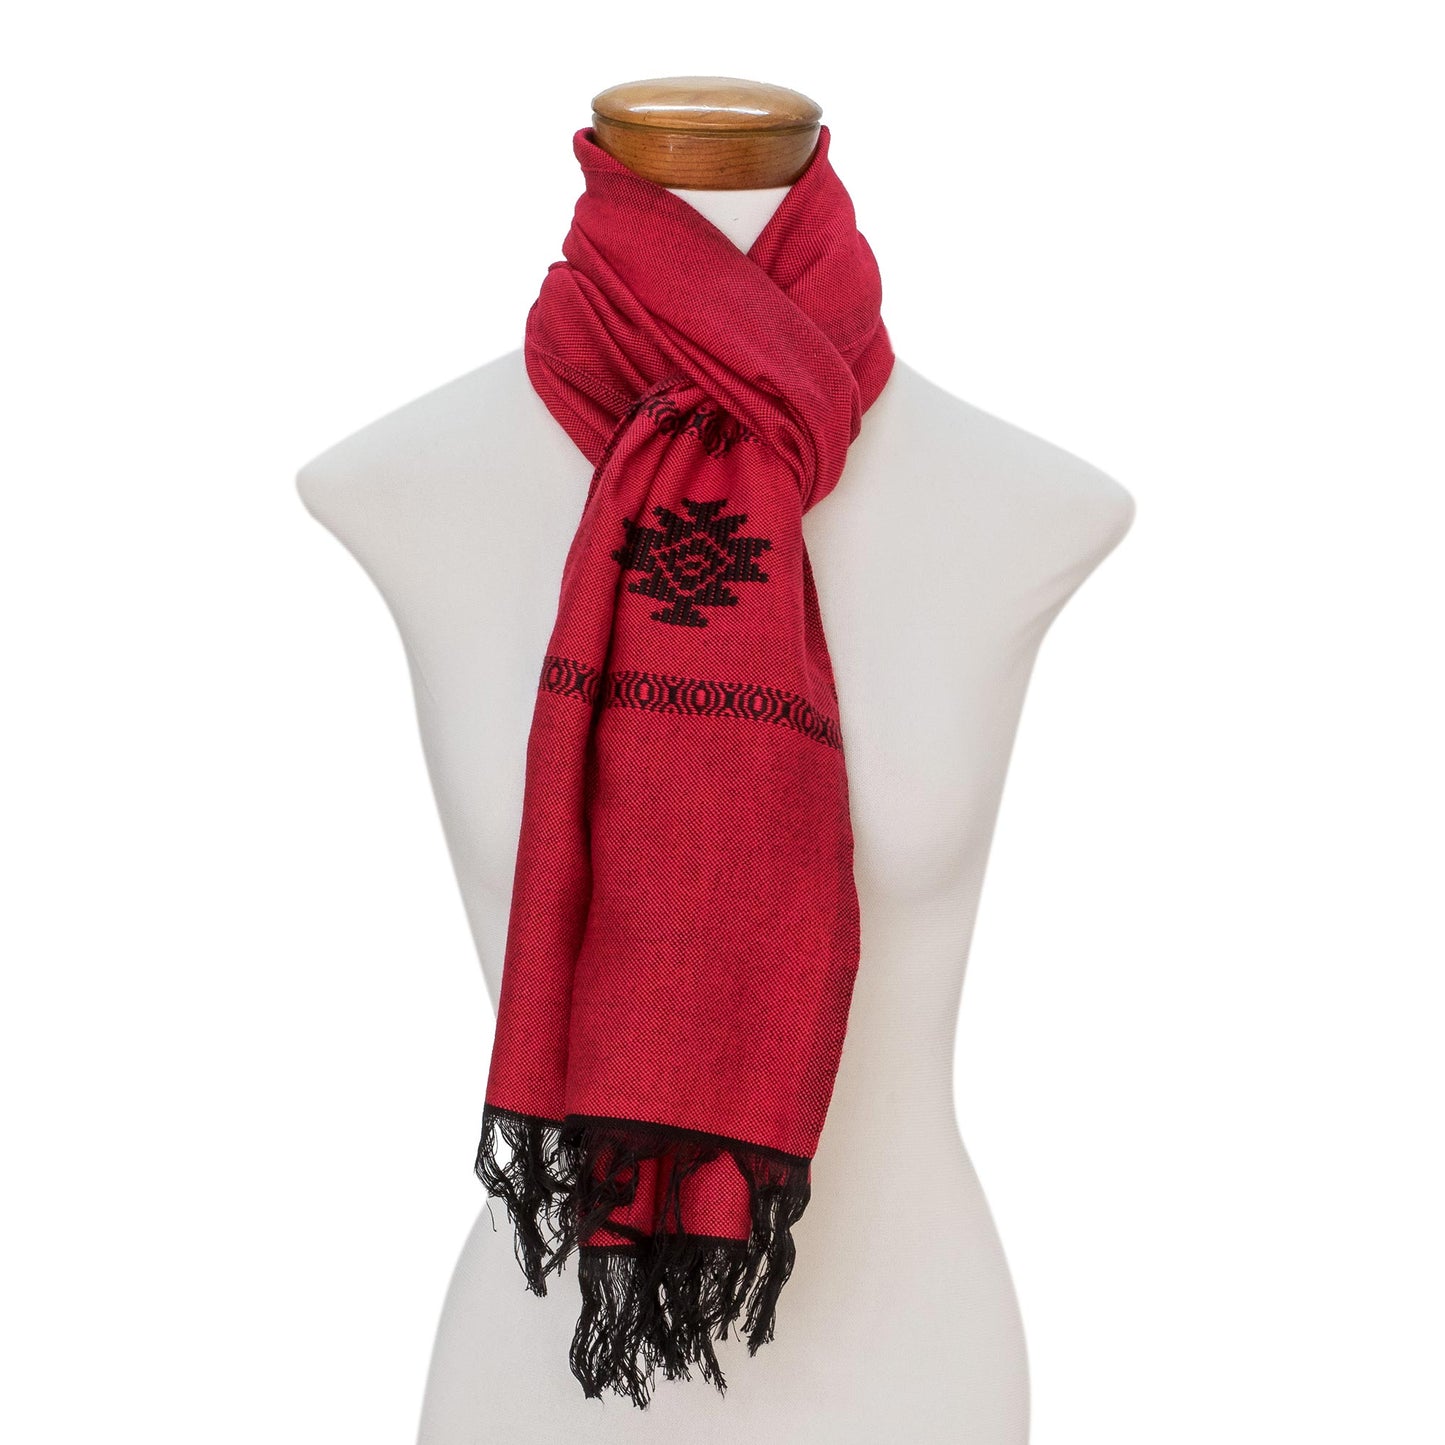 Fret Chic in Red Red Cotton Blend Scarf with Black Stepped-Fret Rhombus Motif